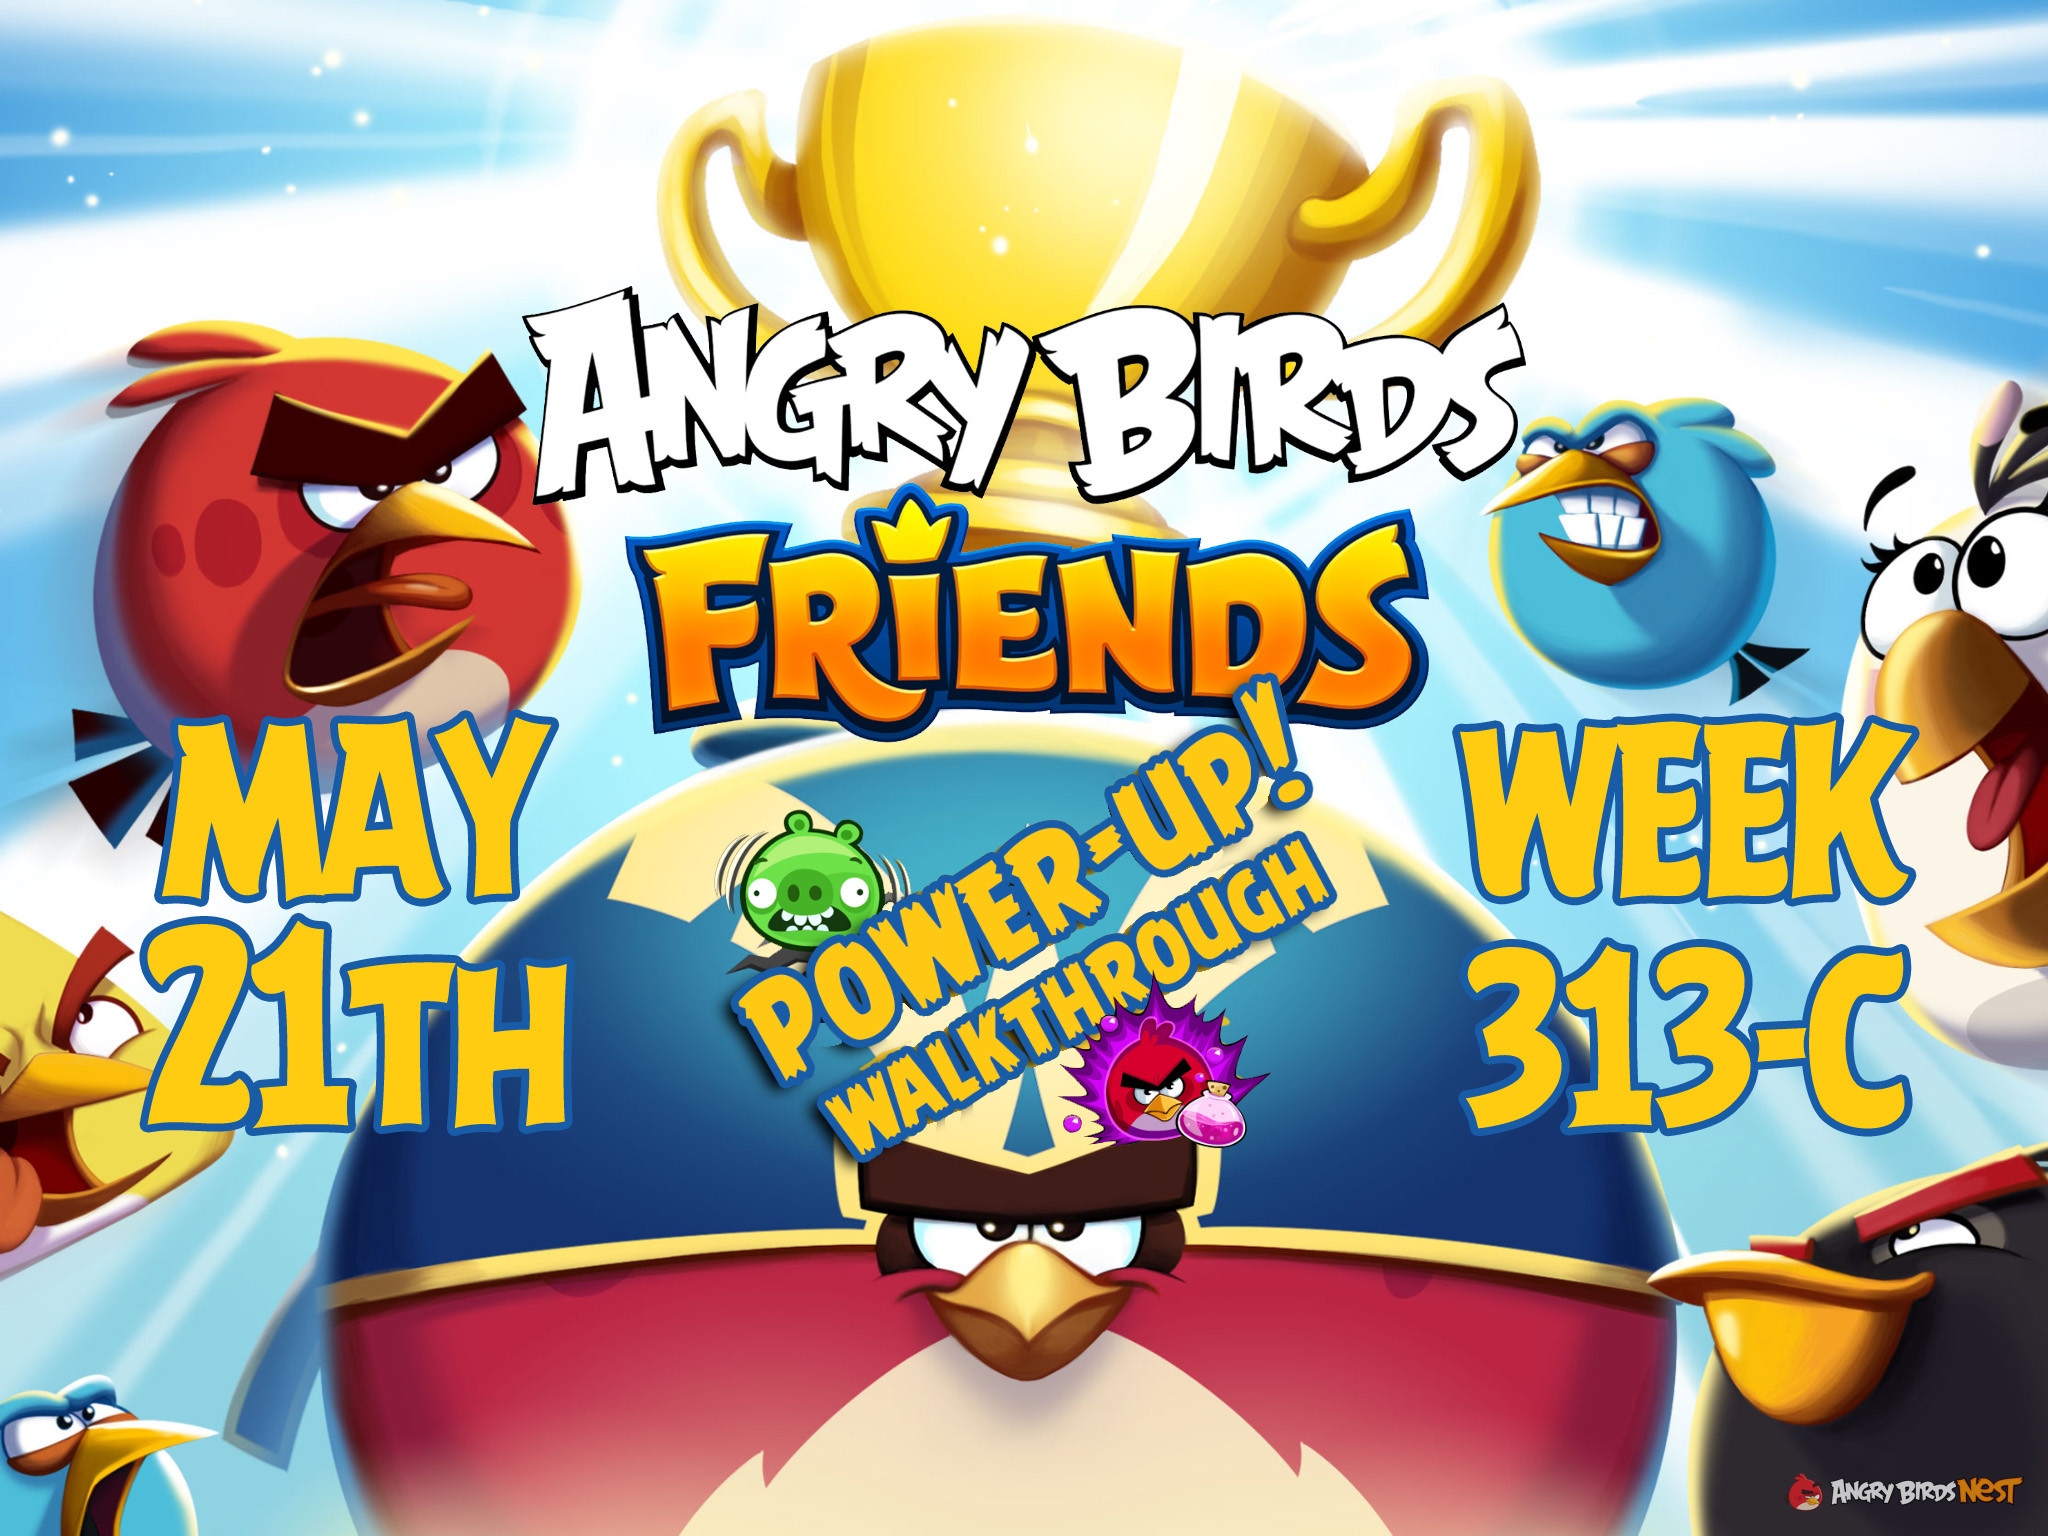 Angry Birds Friends Tournament Week 313-C Feature Image PU